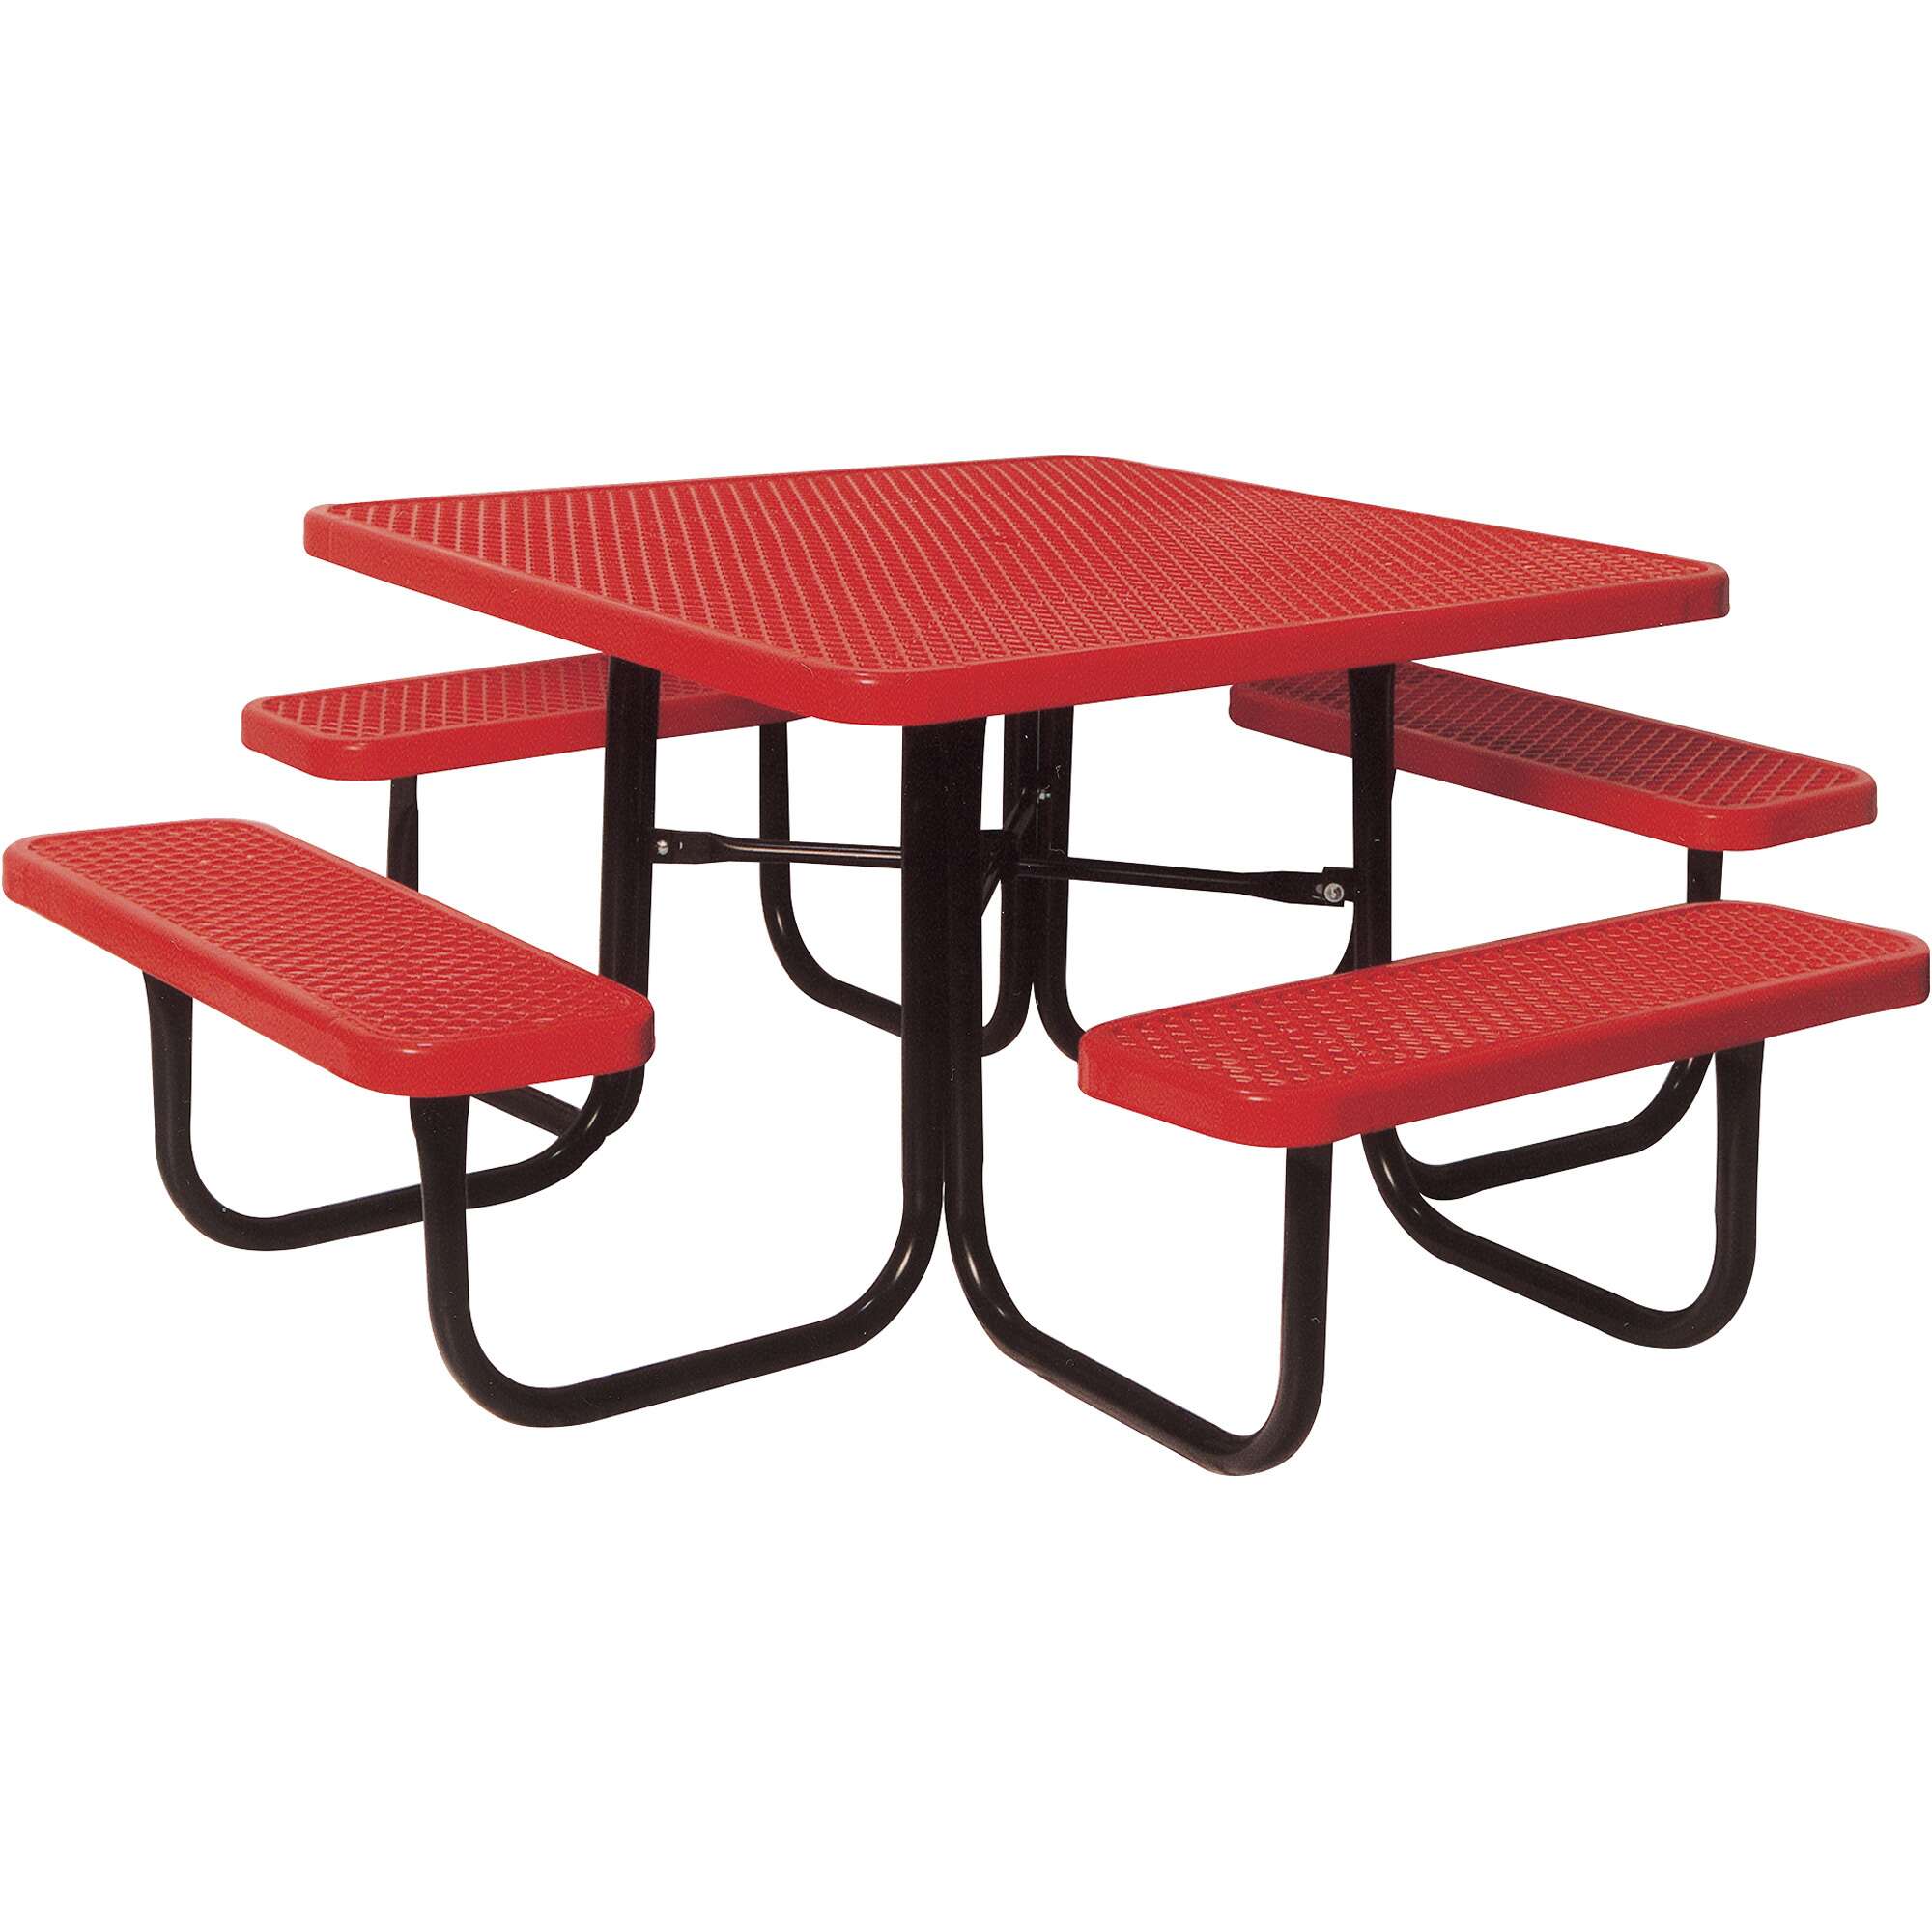 UltraSite 4Seat 46in Diamond Pattern Square Picnic Table Red